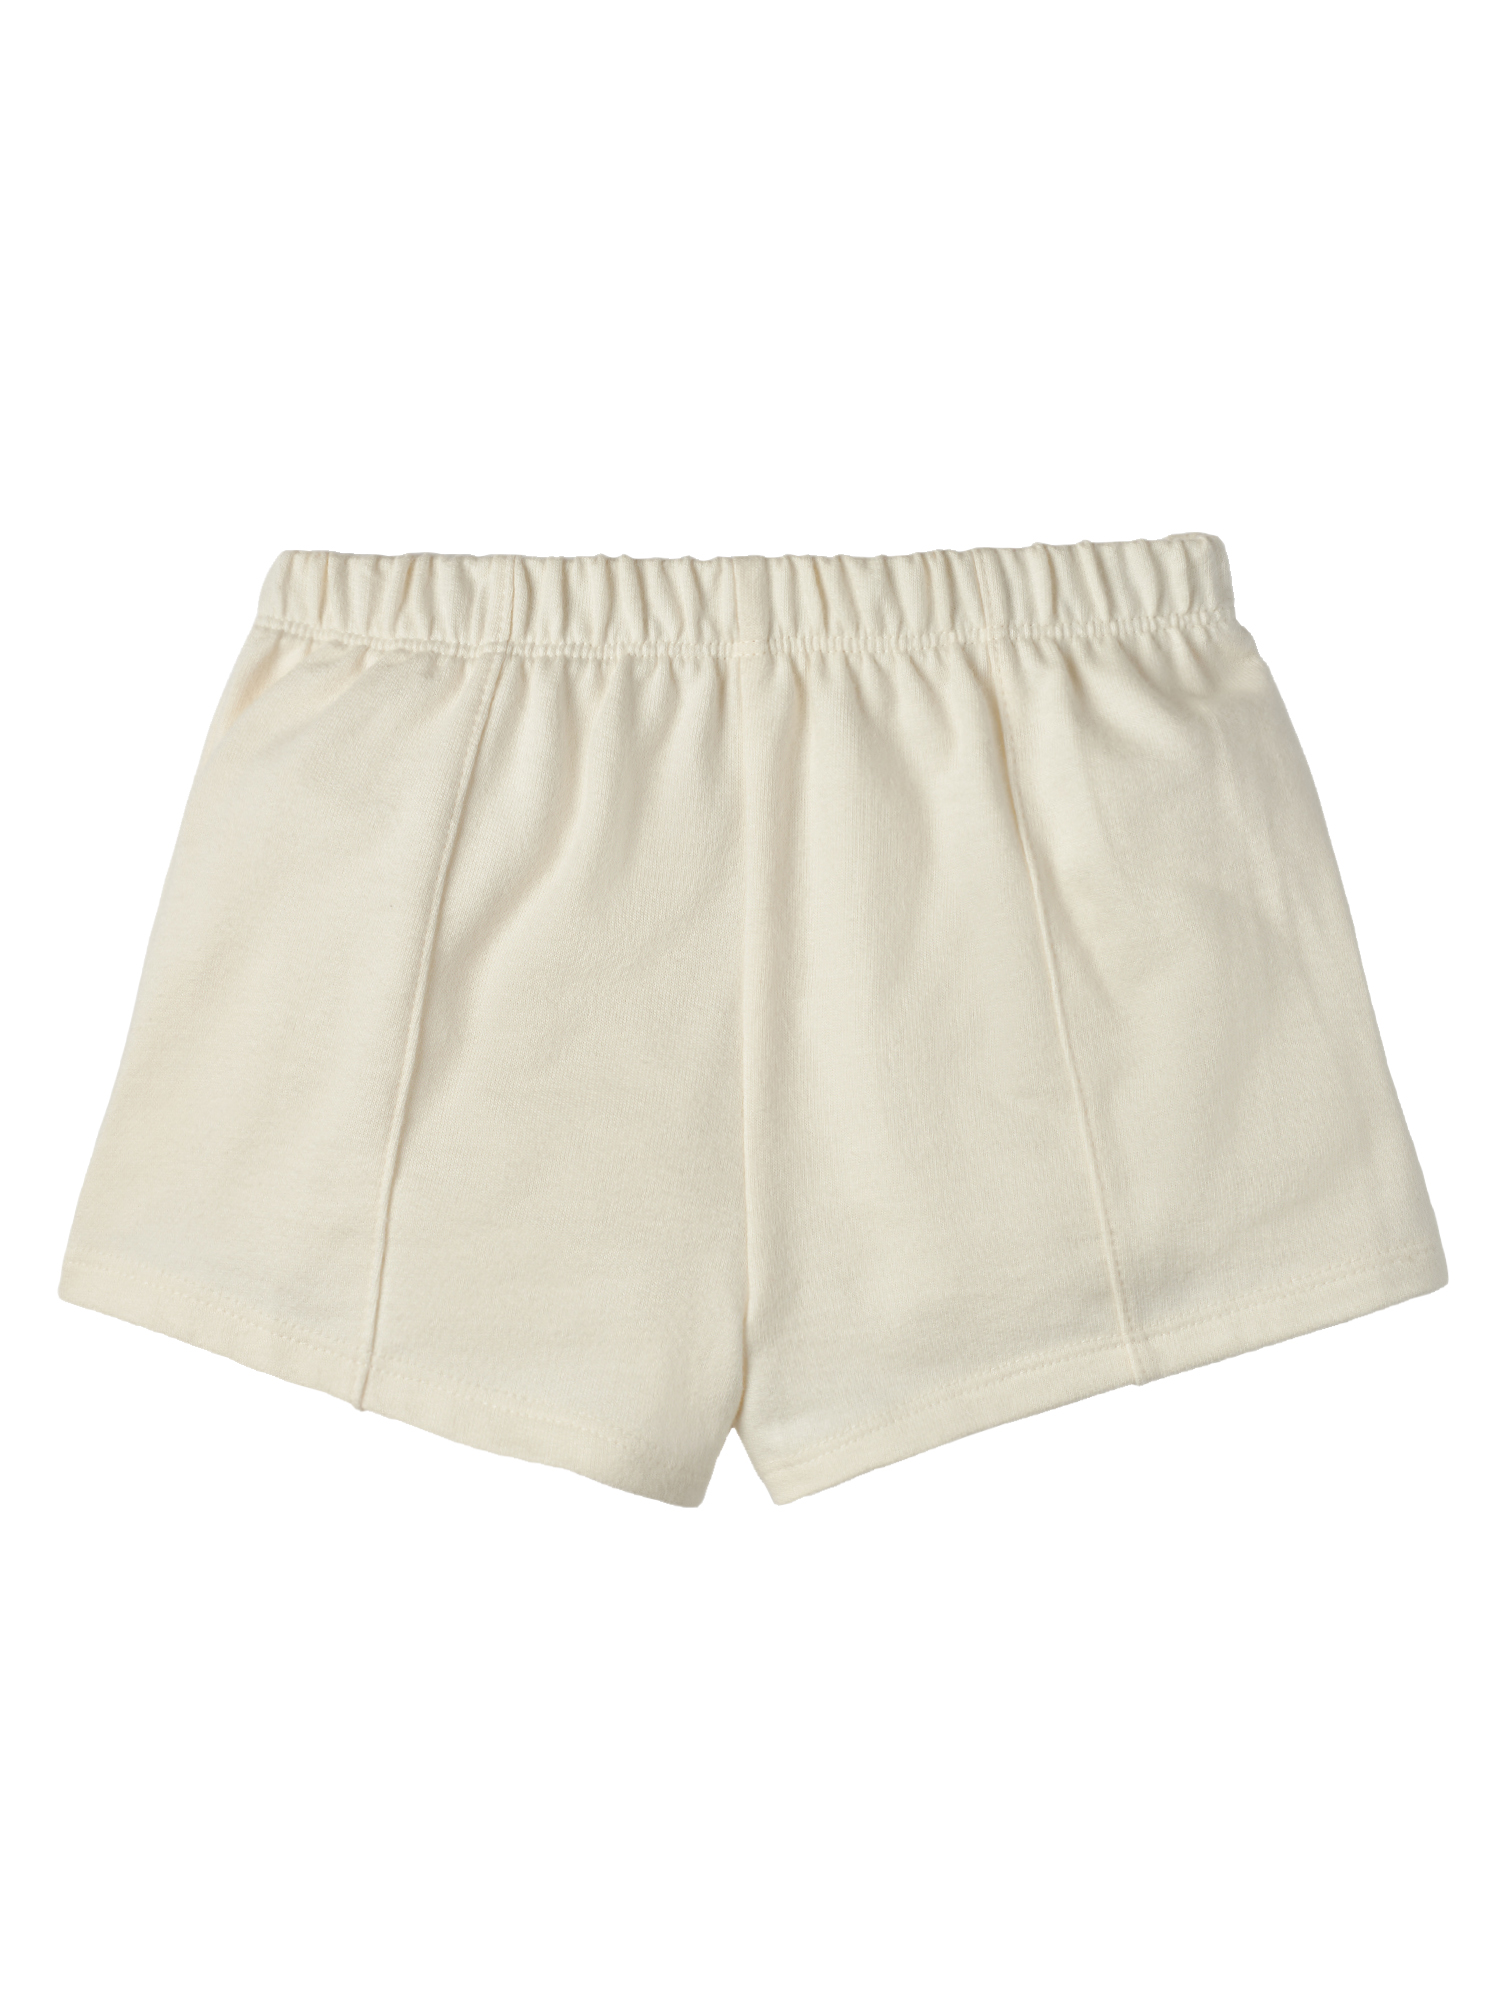 Modern Moments by Gerber Toddler Girl Peached French Terry Shorts, 2-Pack, Sizes 12M-5T - image 5 of 11